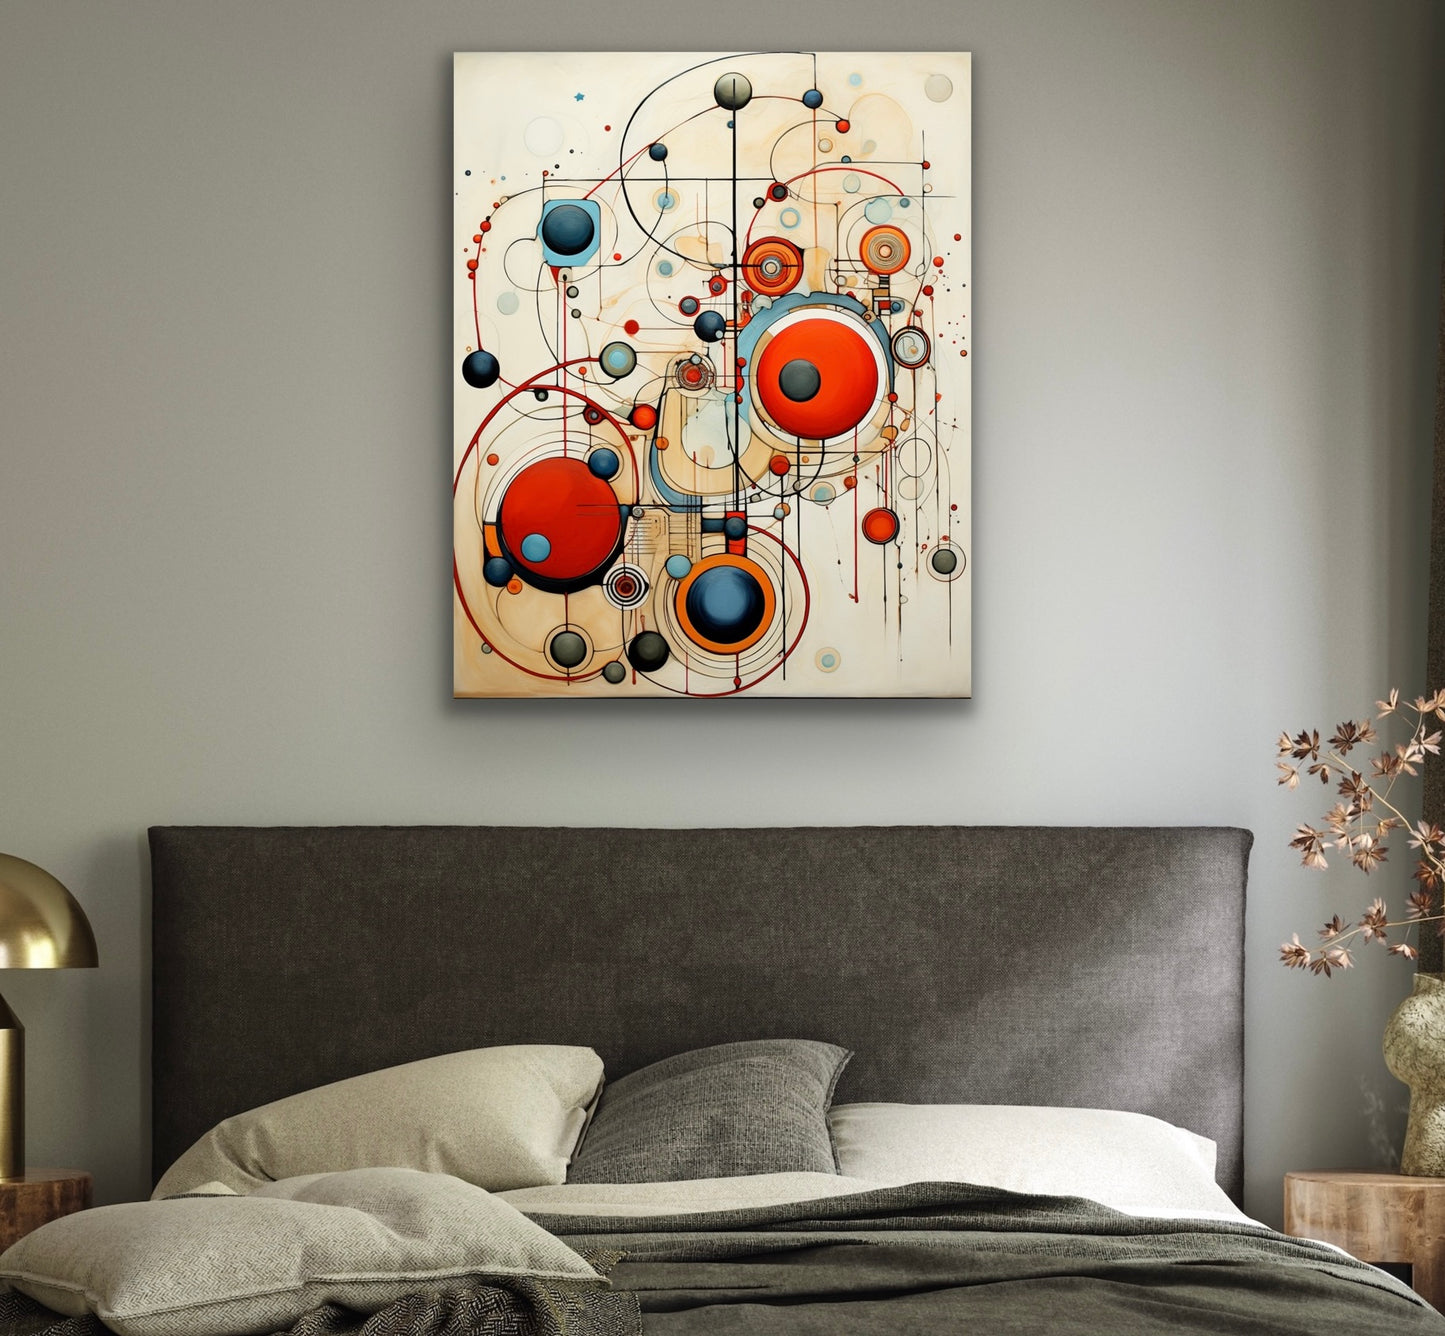 Circles in Motion | Stretched Canvas Print Wall Art | African American Art | Staging Art